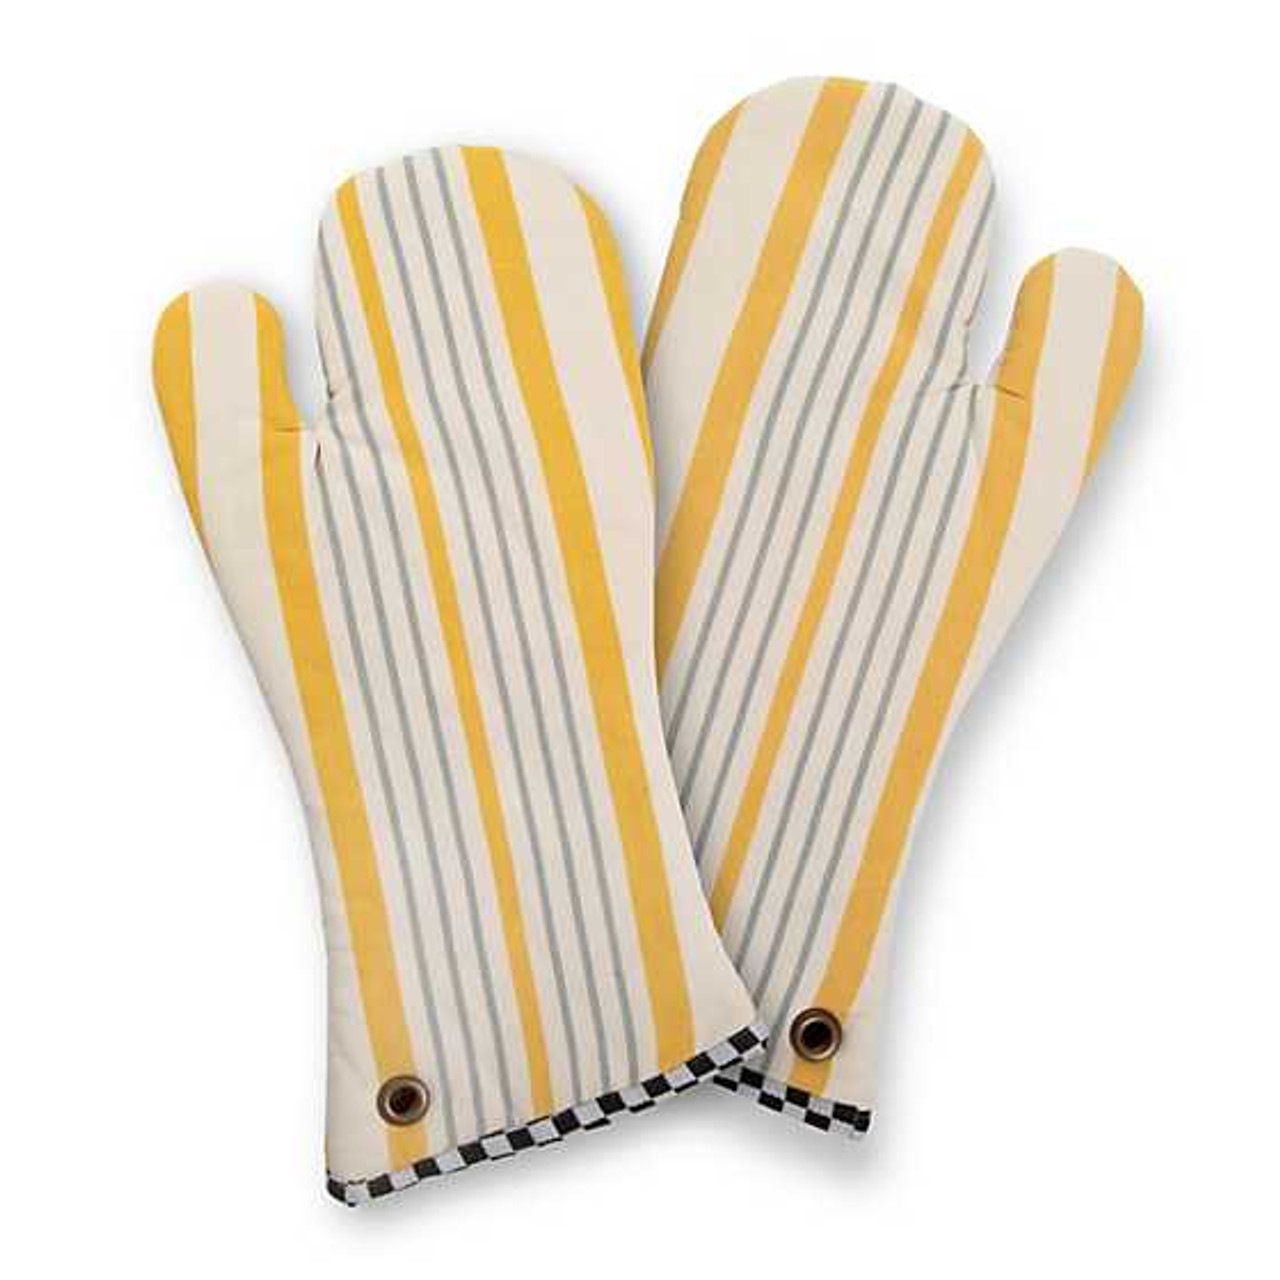 https://cdn11.bigcommerce.com/s-e0xlh4avpe/images/stencil/1280x1280/products/102741/136011/mackenzie-childs-sunshine-oven-mitts-set-of-2-8__02034.1650936694.jpg?c=1